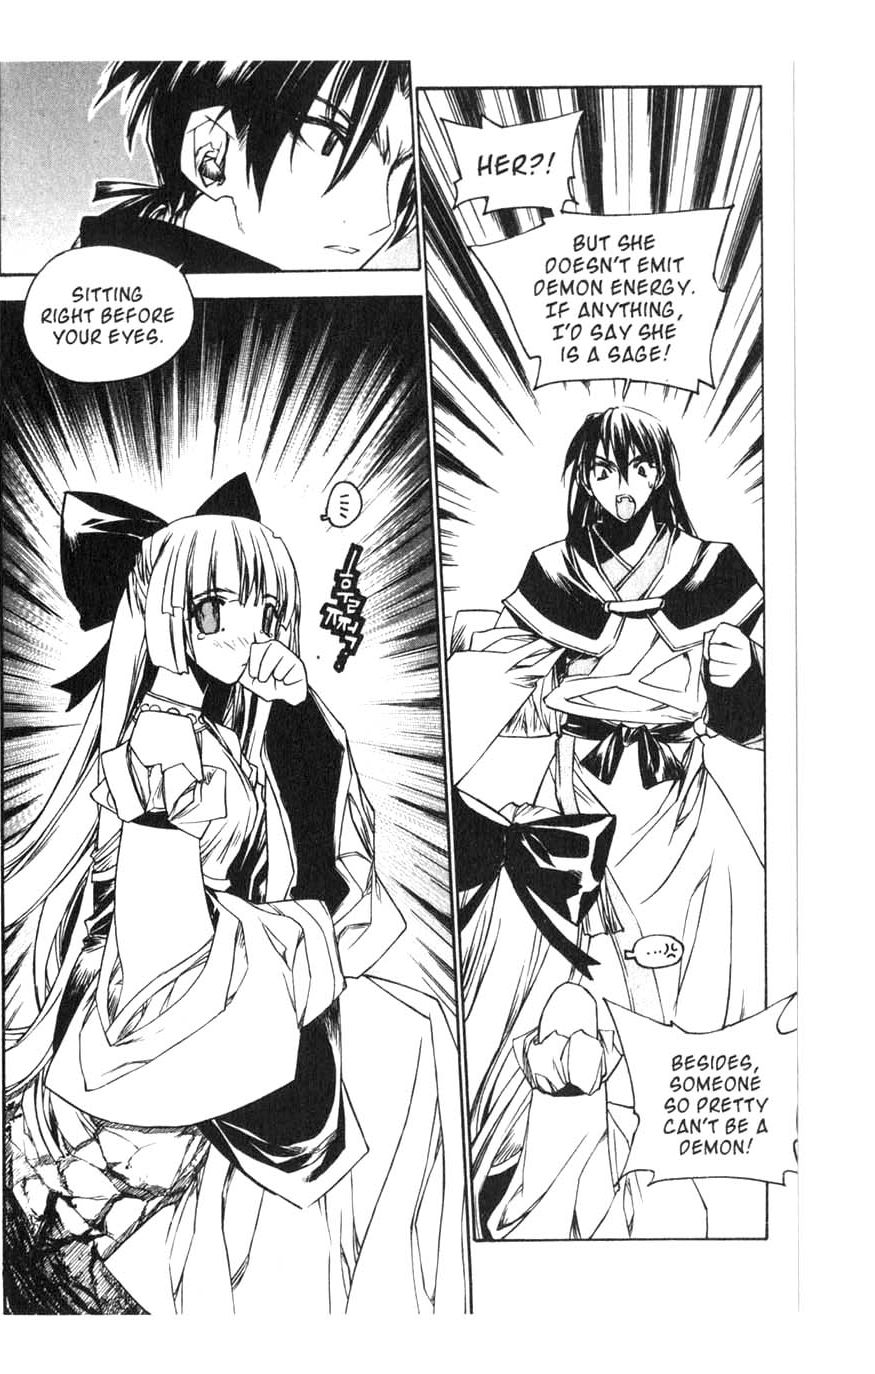 Chronicles of the Cursed Sword Vol. 15 Ch. 60 To the Great Azure Pavilion